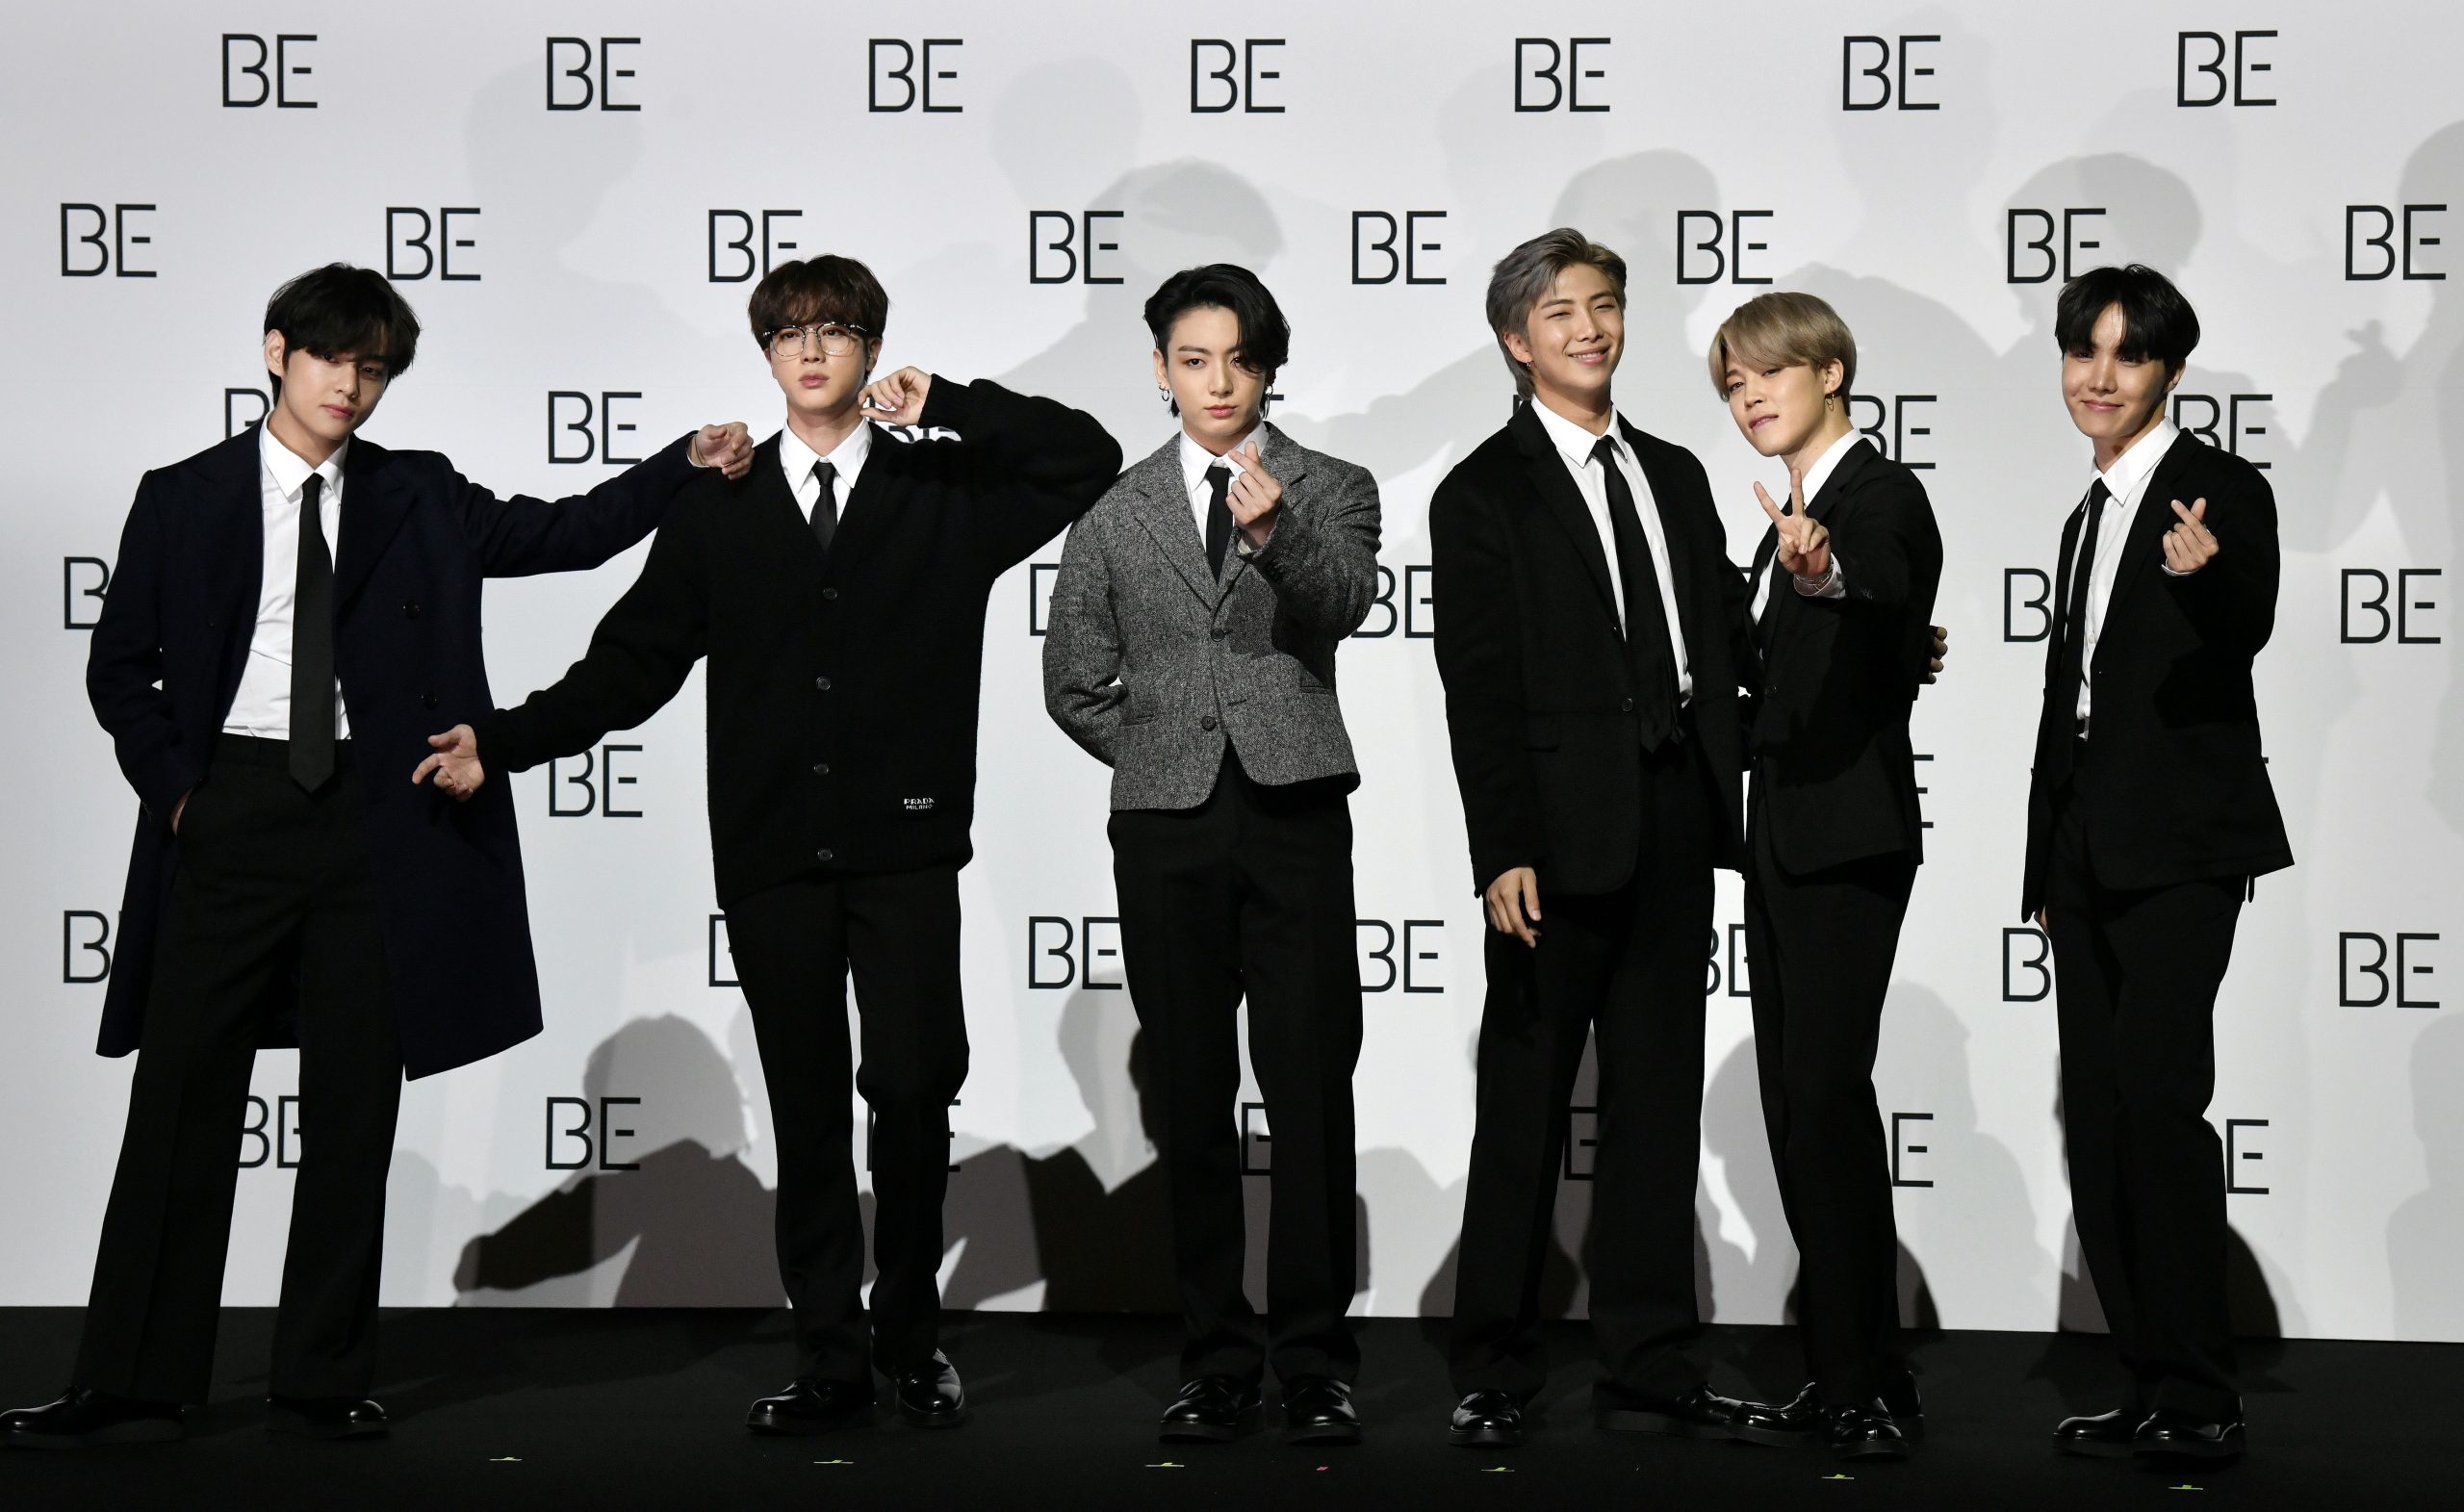 BTS lands in New York for UNGA, fans divided over band’s privacy